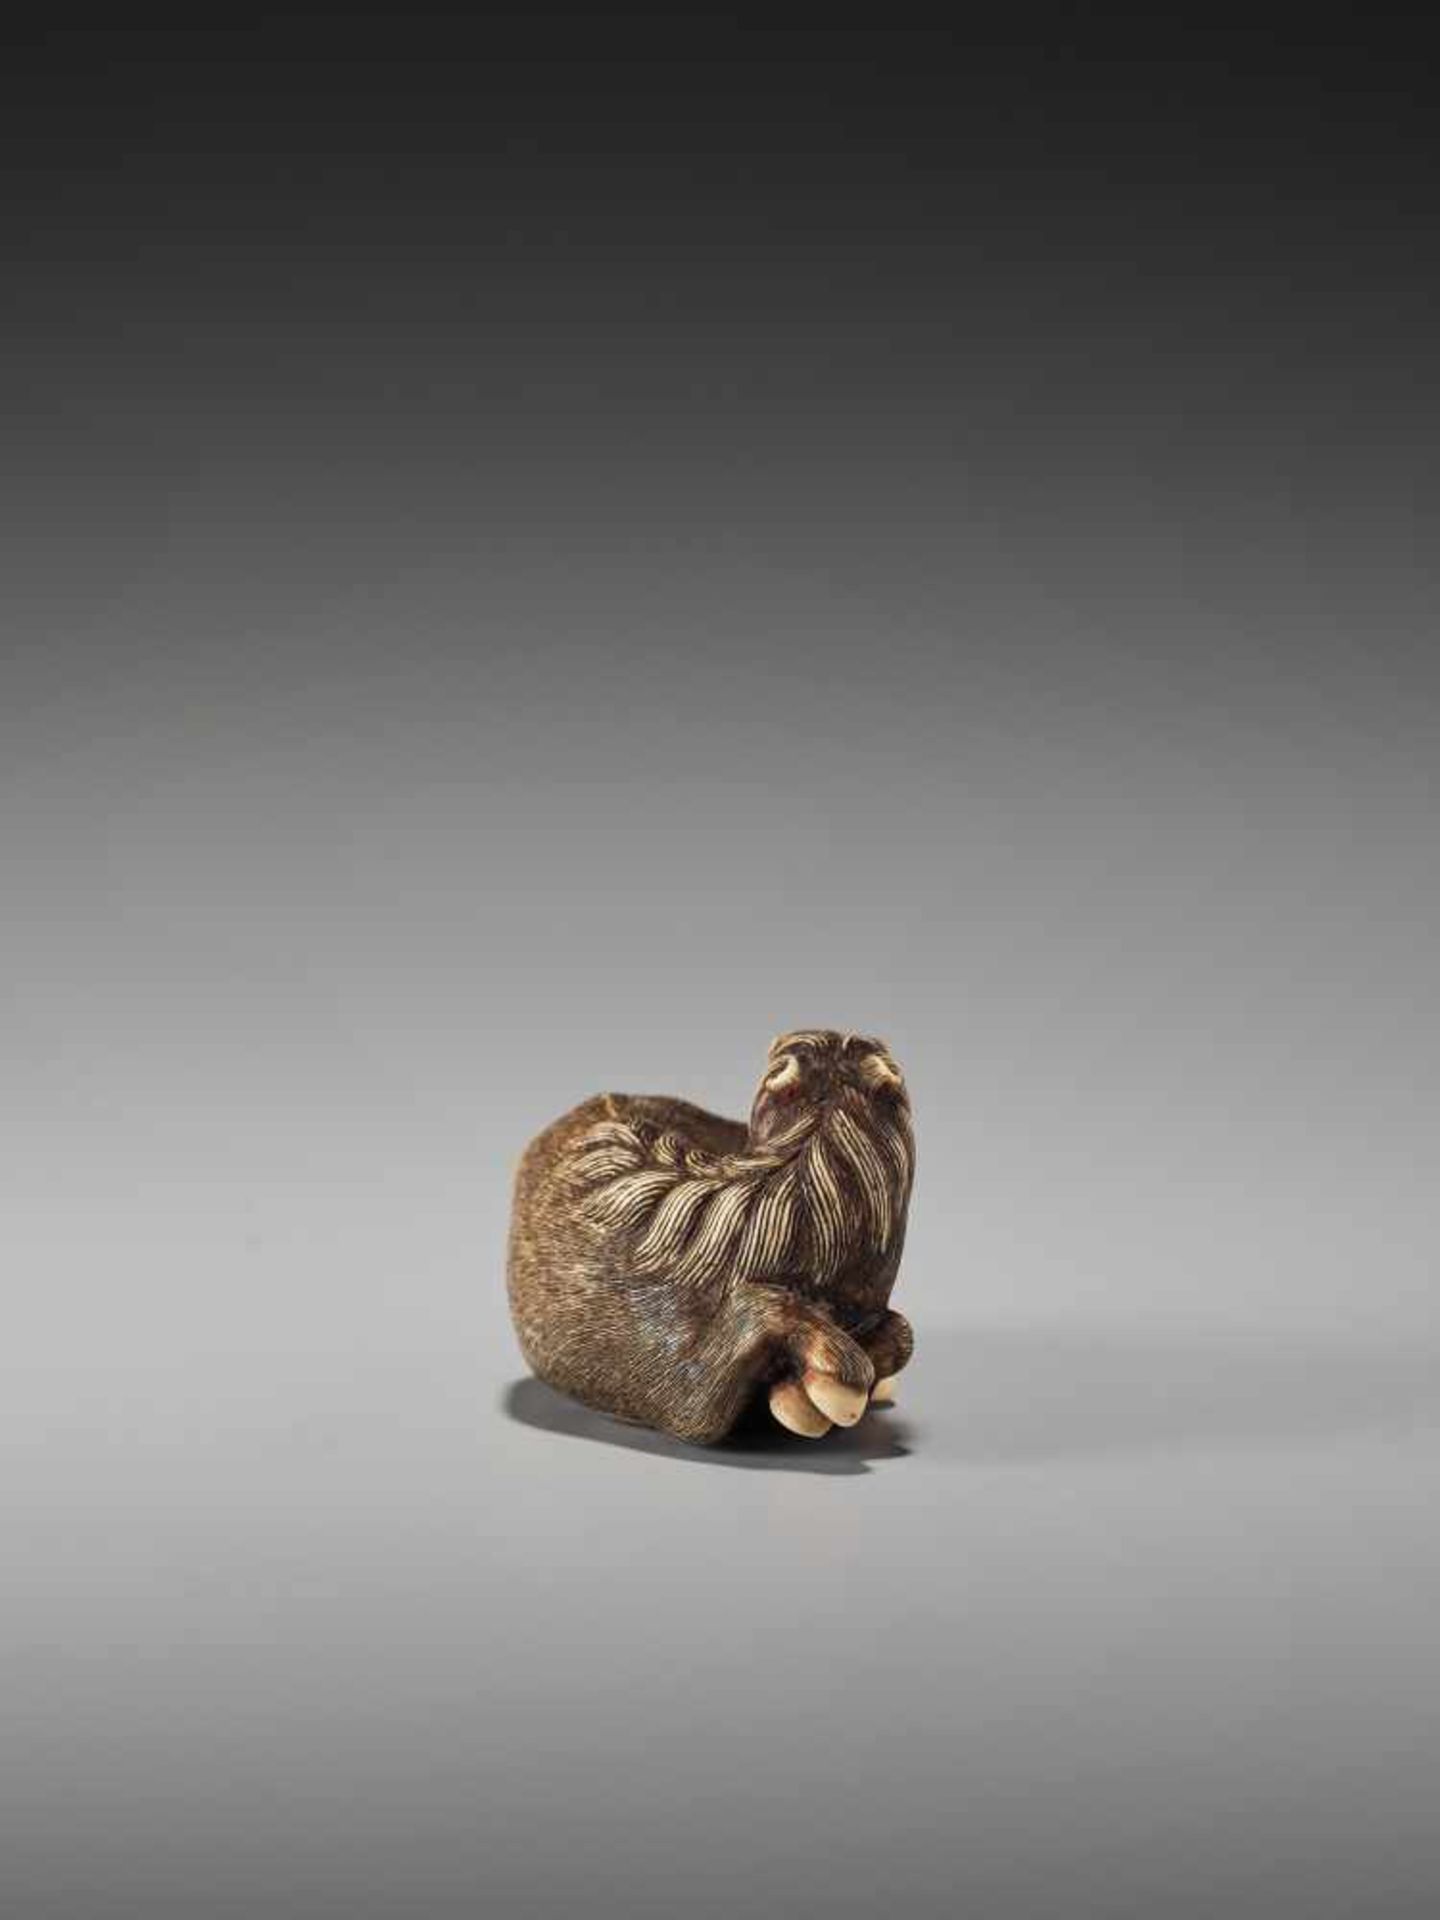 AN EXCELLENT AND RARE IVORY NETSUKE OF A RECUMBENT HORSE BY MITSUHIDEBy Mitsuhide, ivory - Image 7 of 13